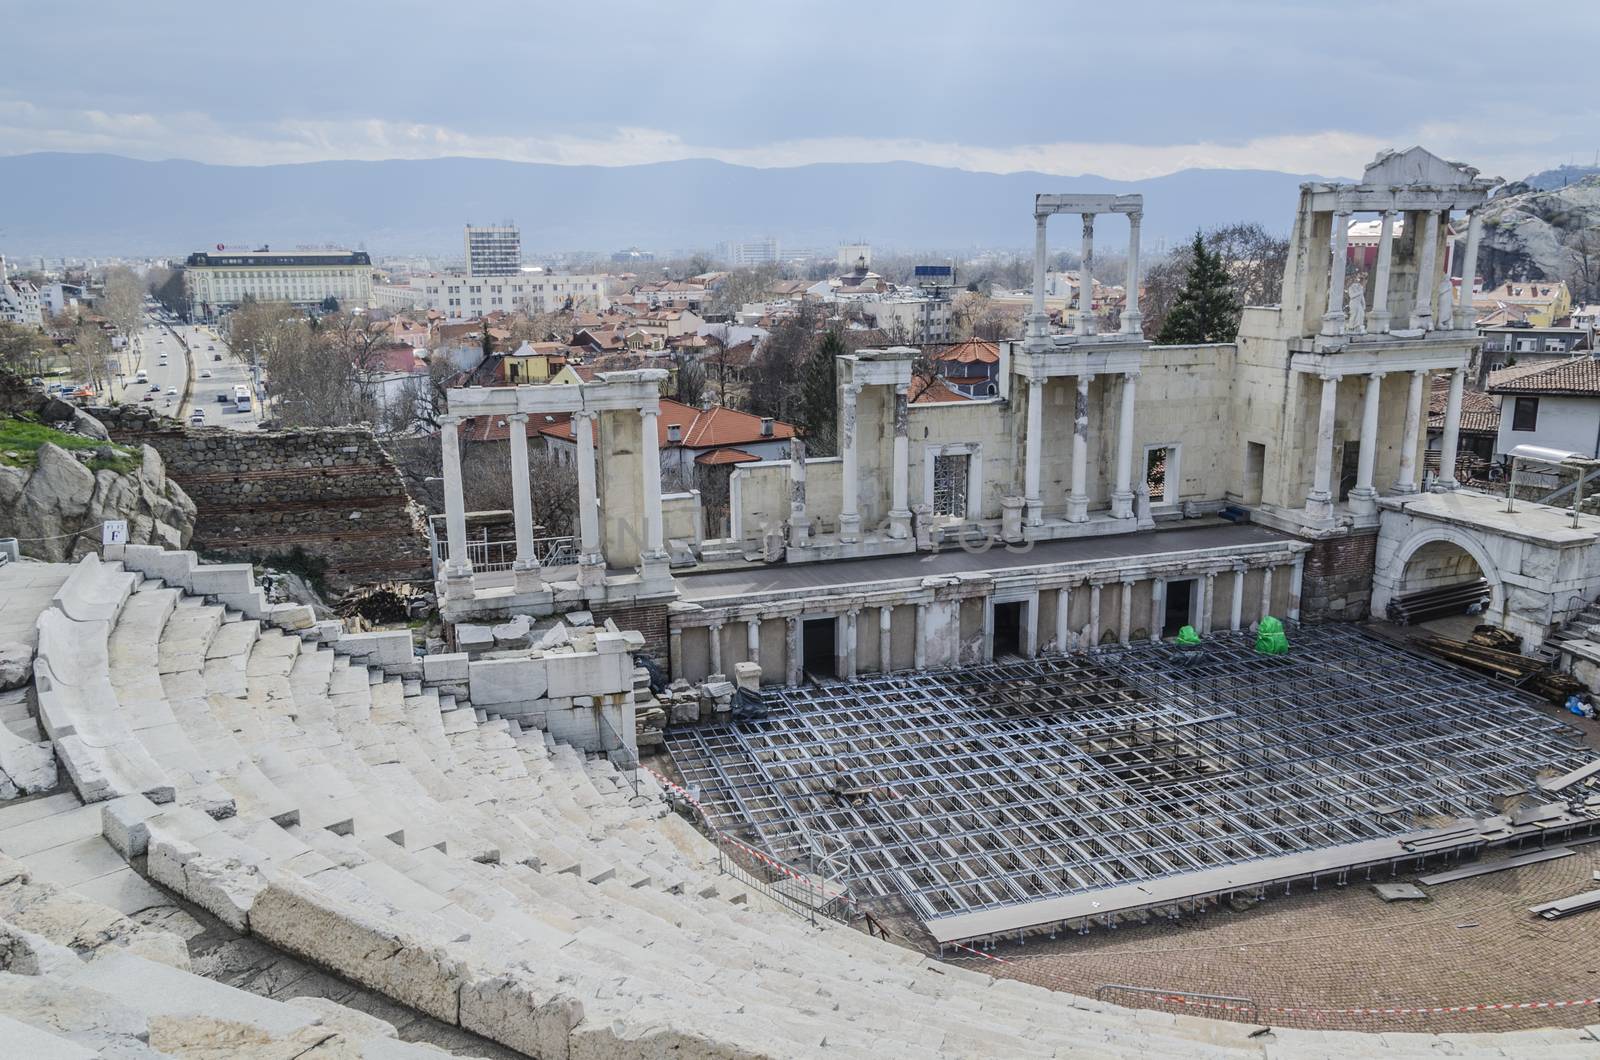 Remains of a Roman theater in one of the oldest cities of Europe if not the most and now second city of Bulgaria Plovdiv